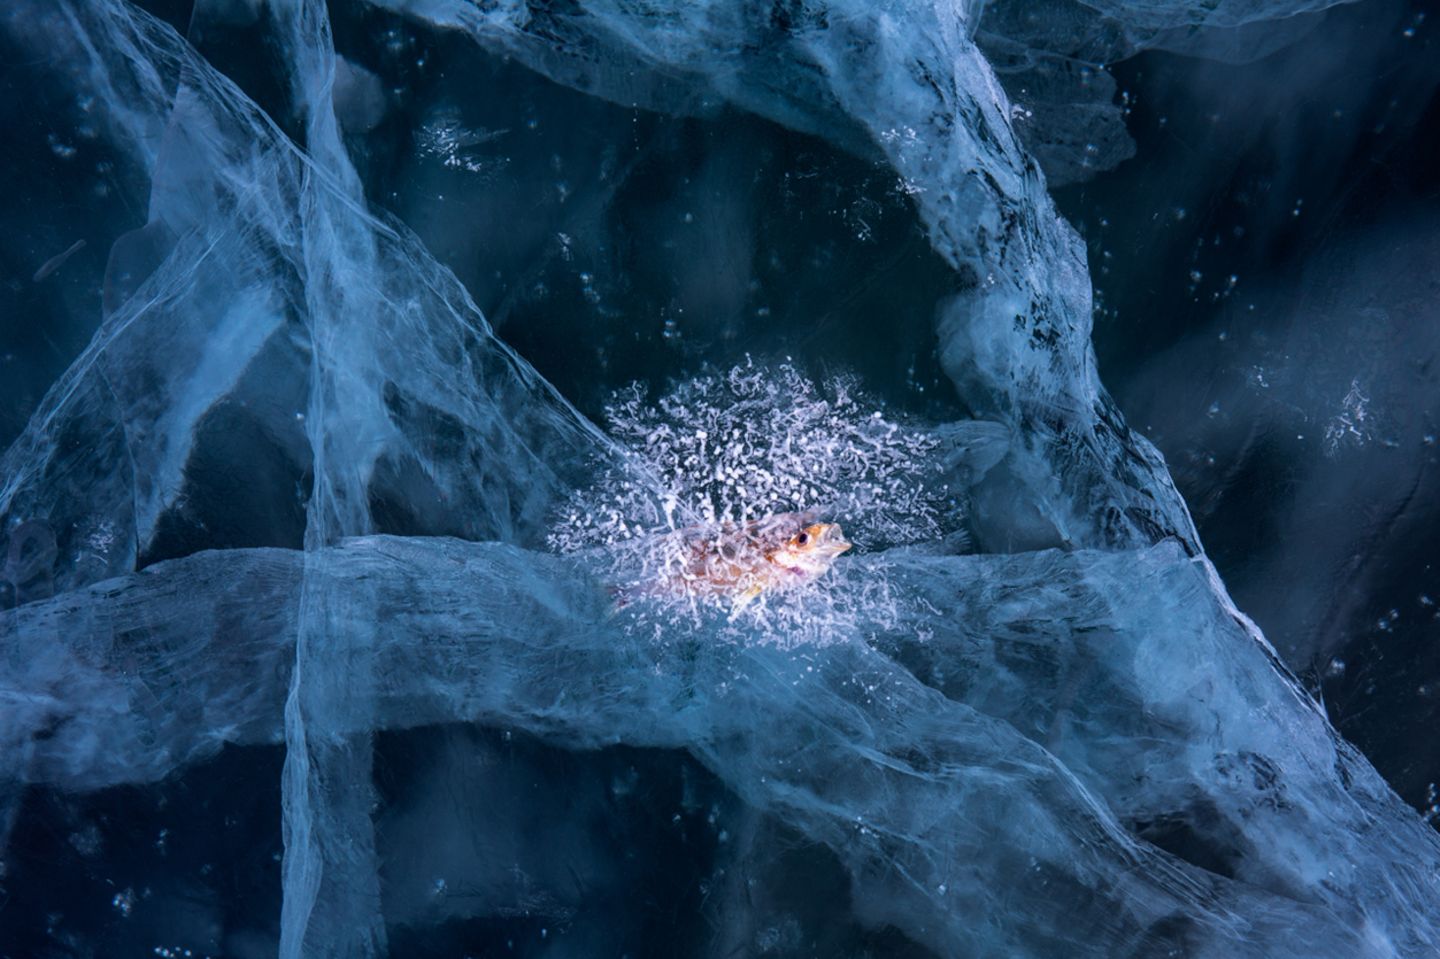 Andrea Pozzi/Nature Photographer of the Year